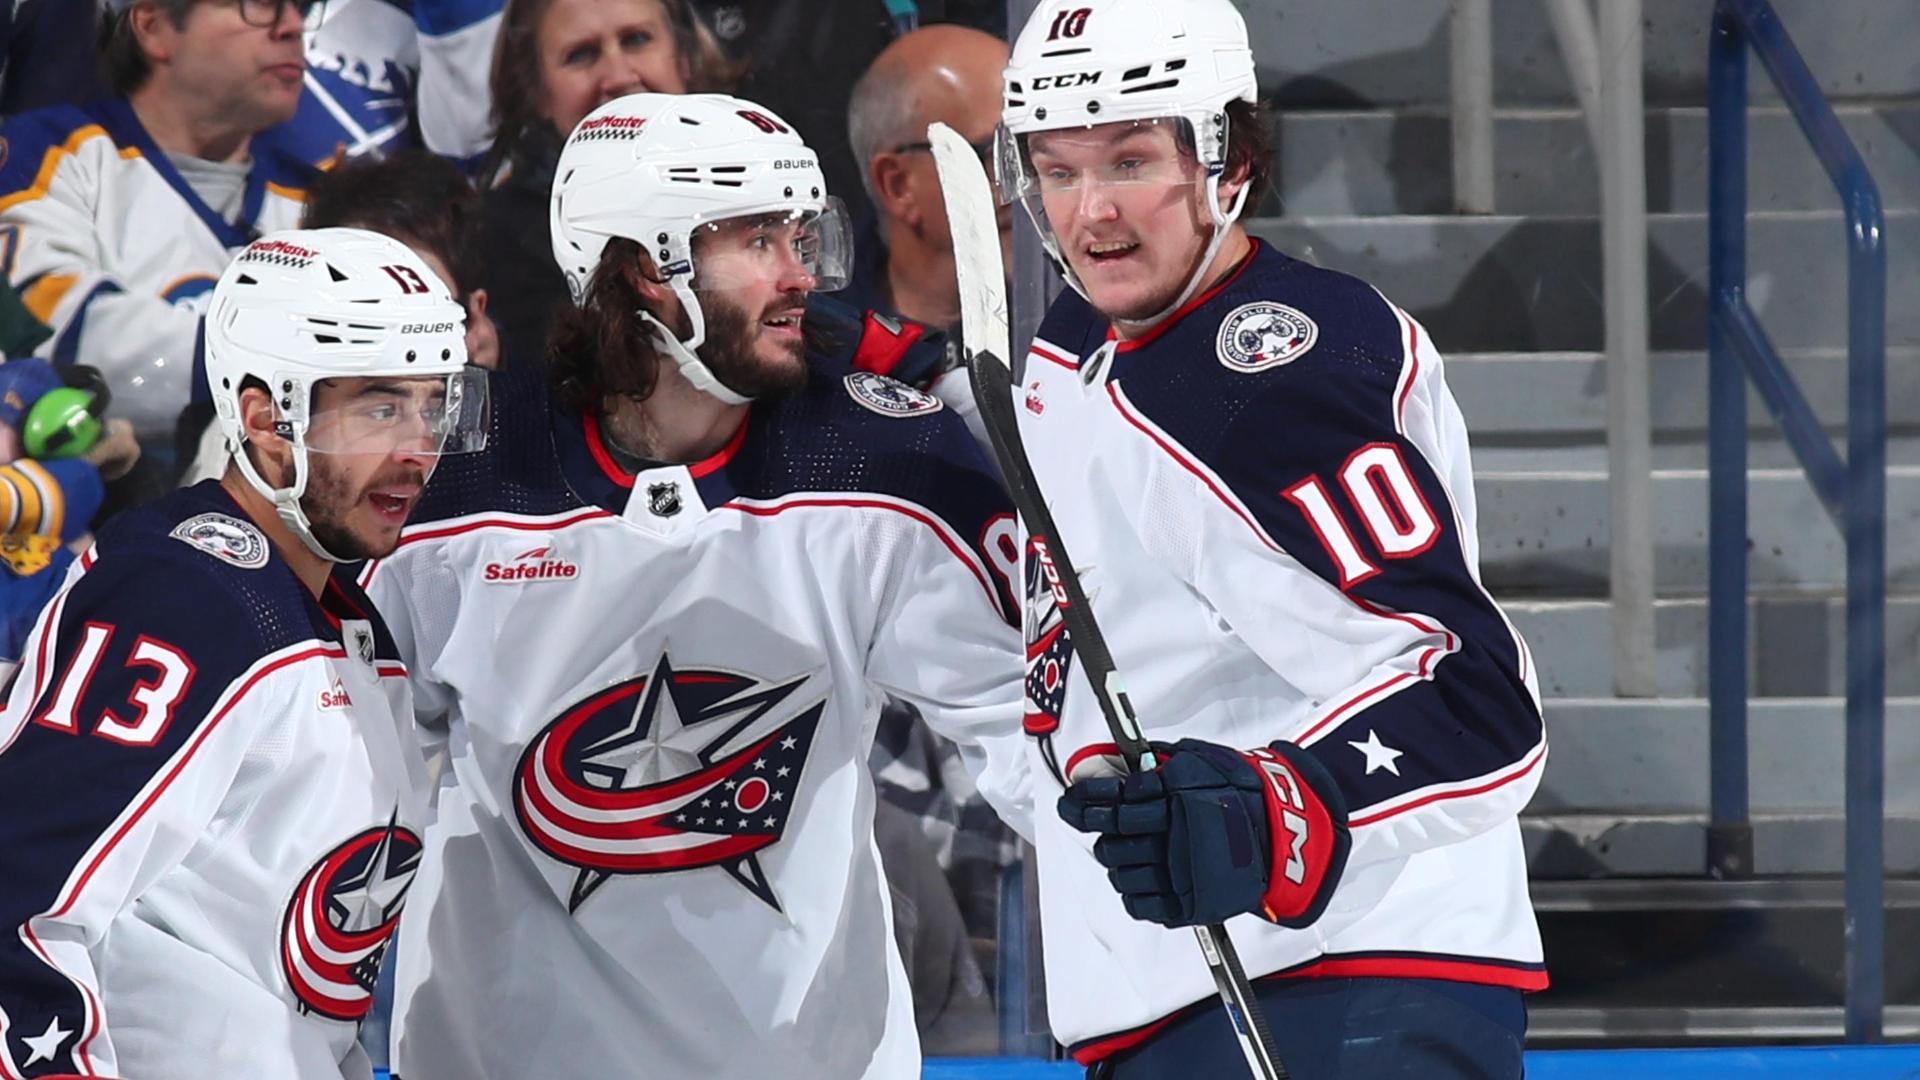 Kirill Marchenko completes hat trick as Blue Jackets thrash Sabres